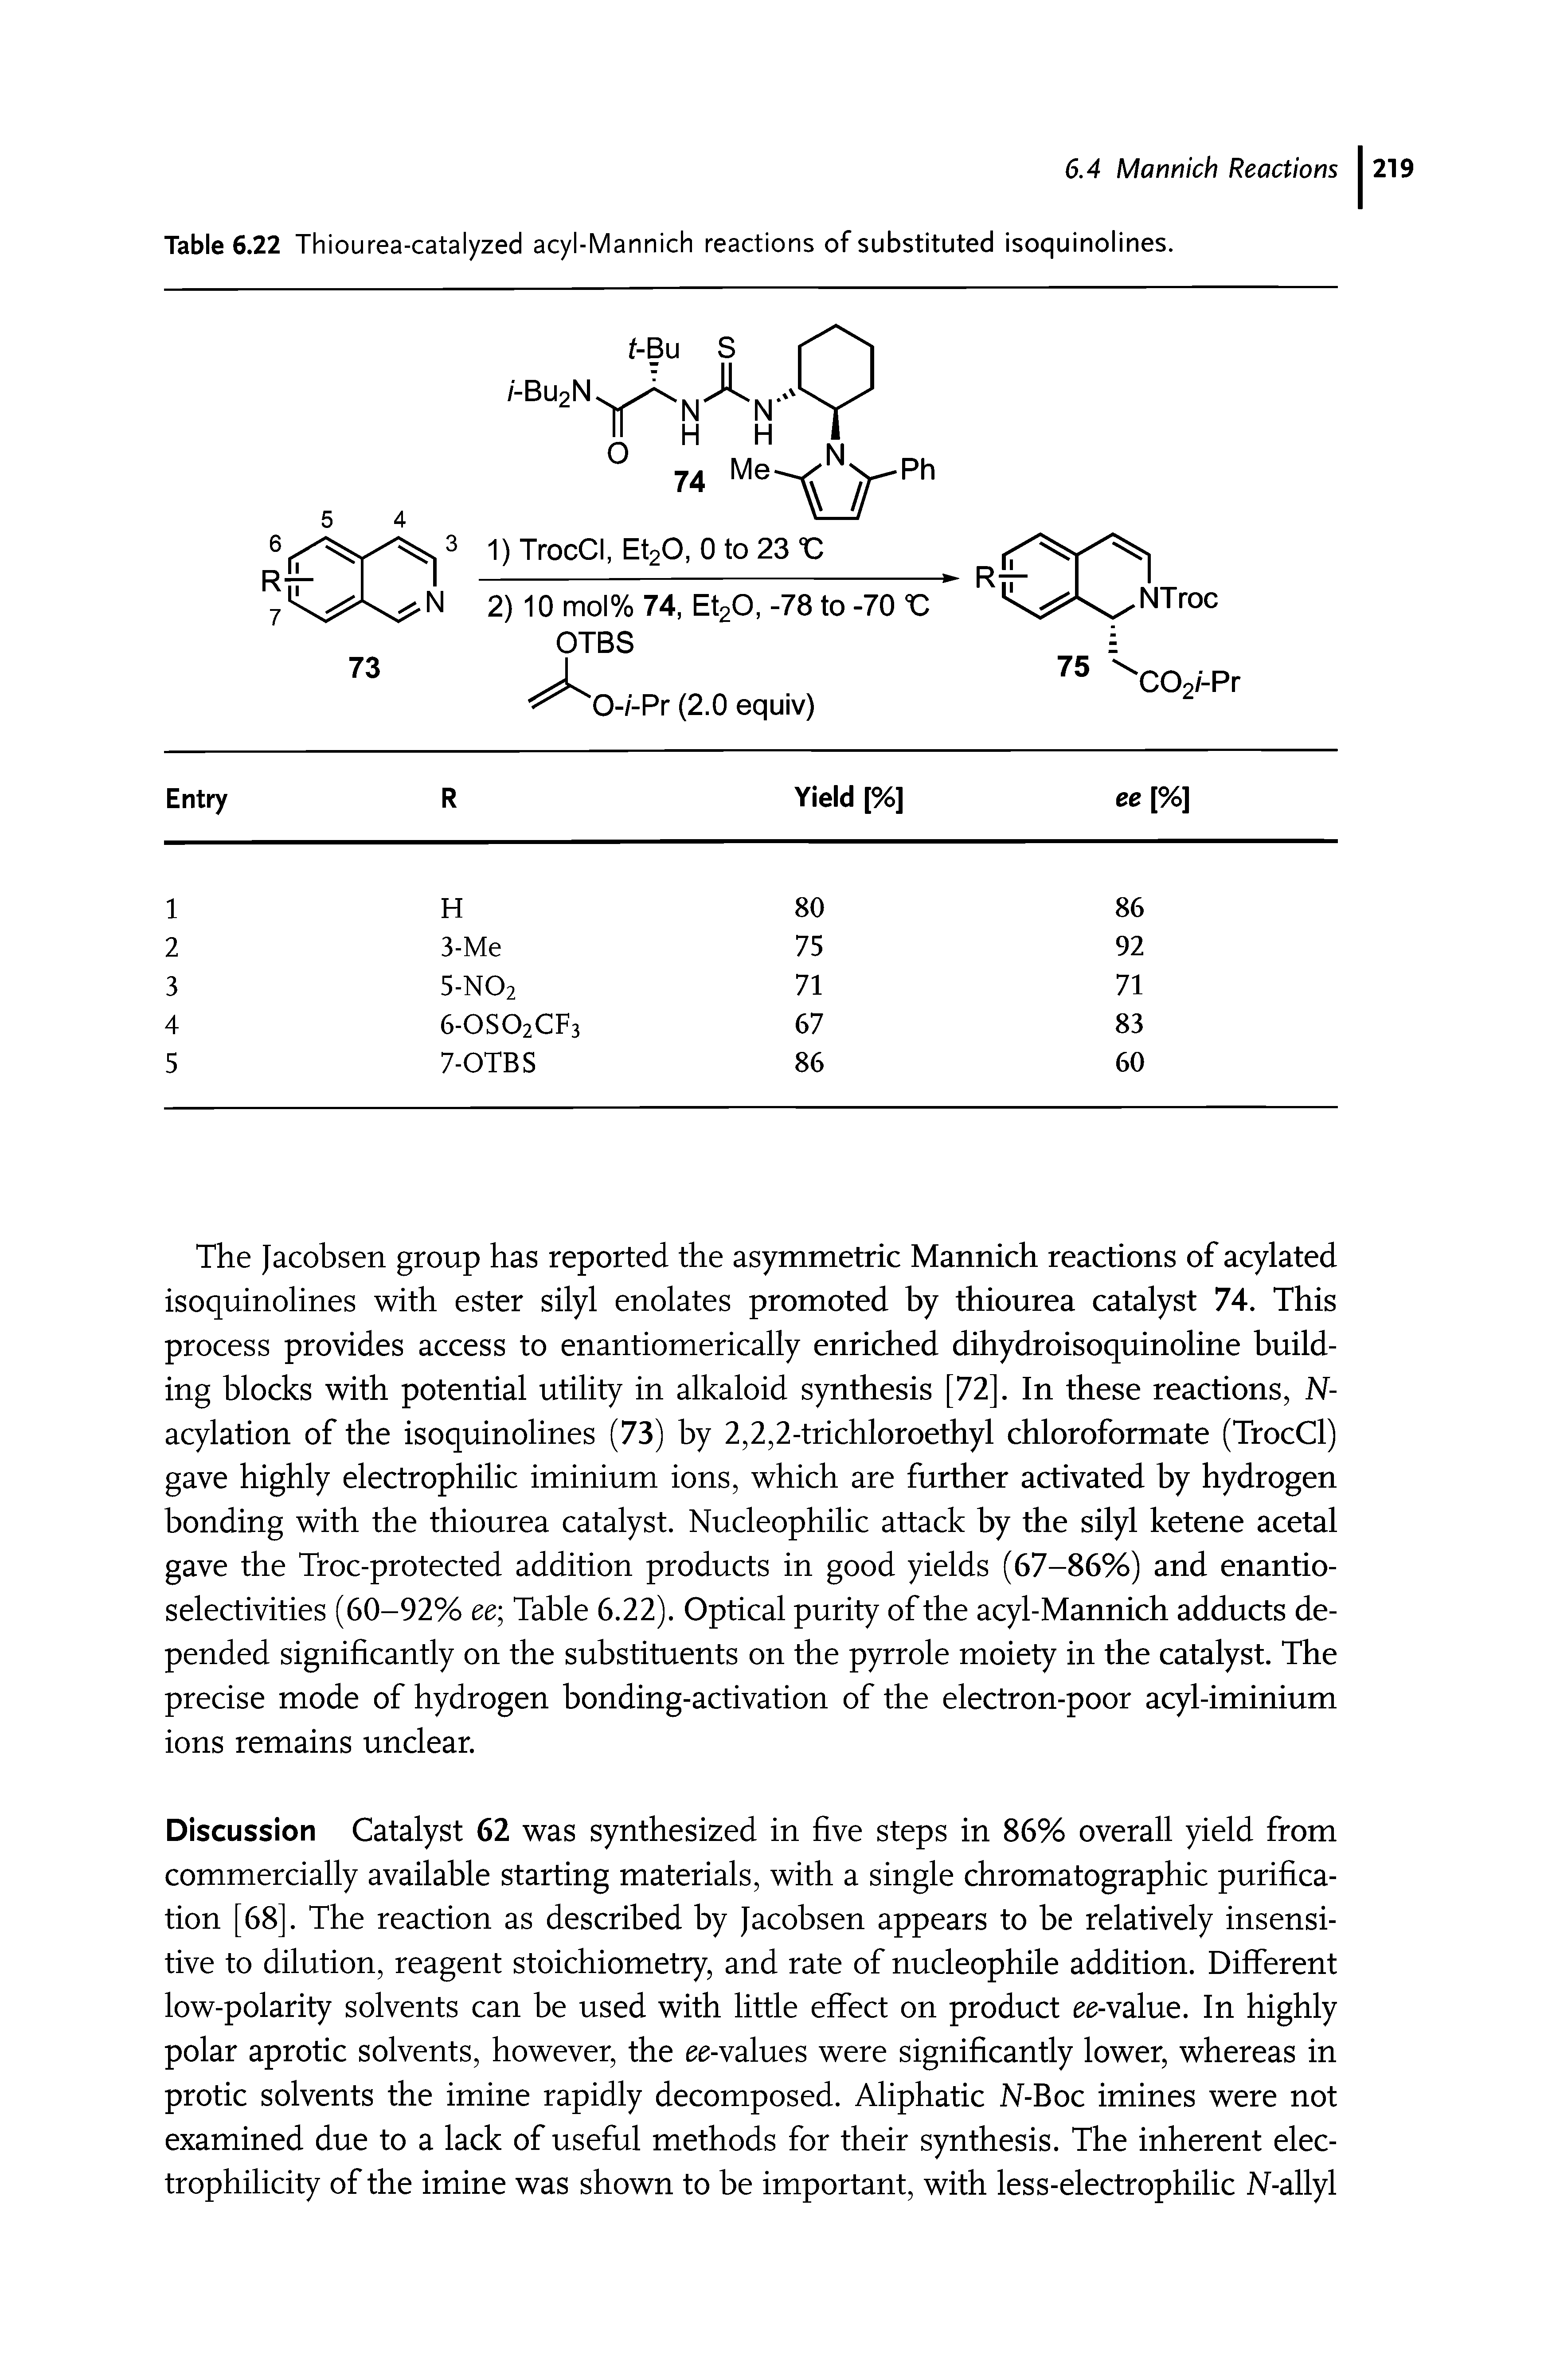 Table 6.22 Thiourea-catalyzed acyl-Mannich reactions of substituted isoquinolines.